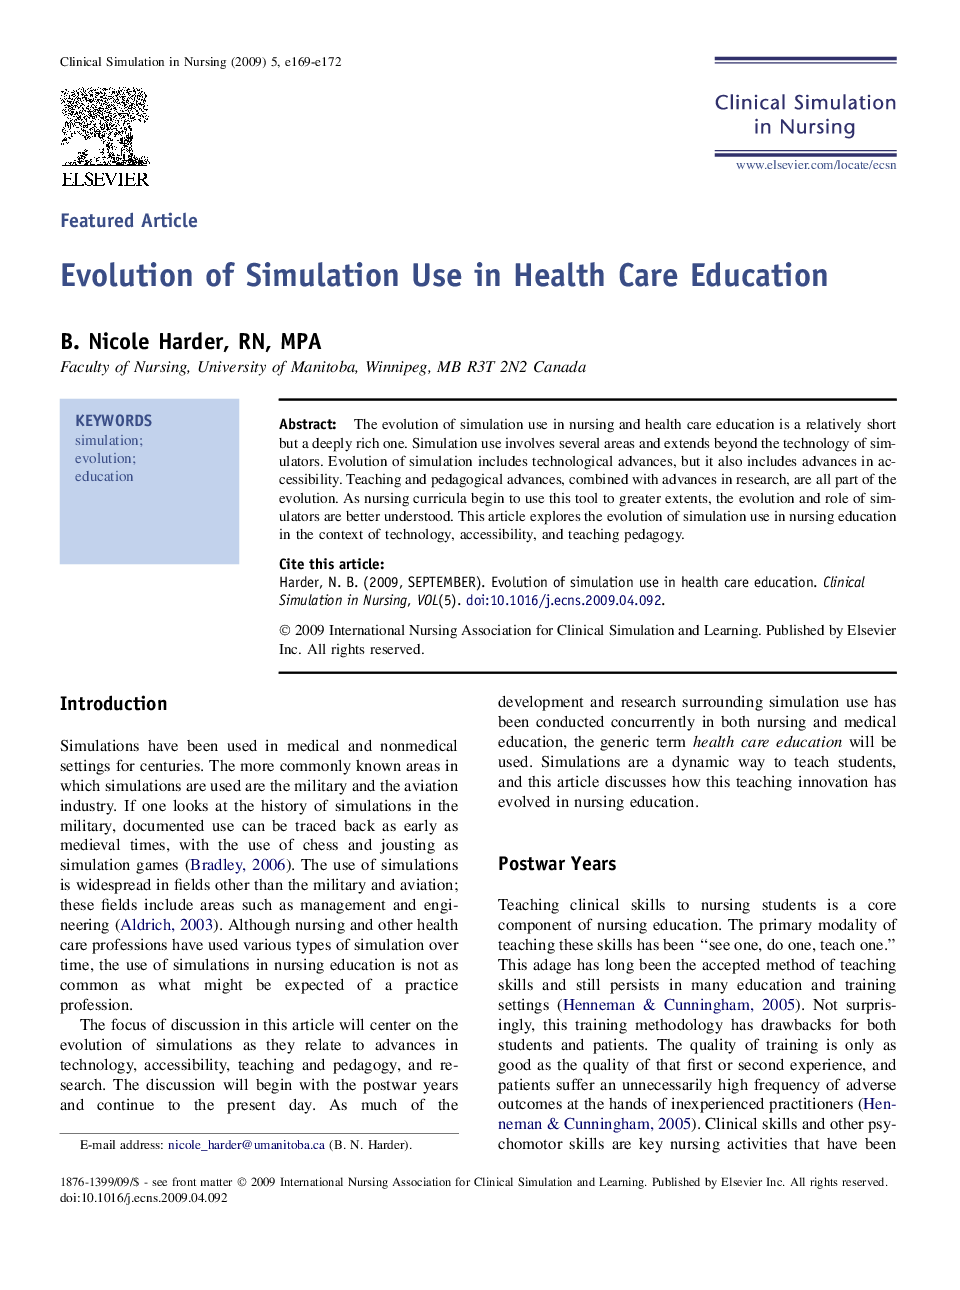 Evolution of Simulation Use in Health Care Education 